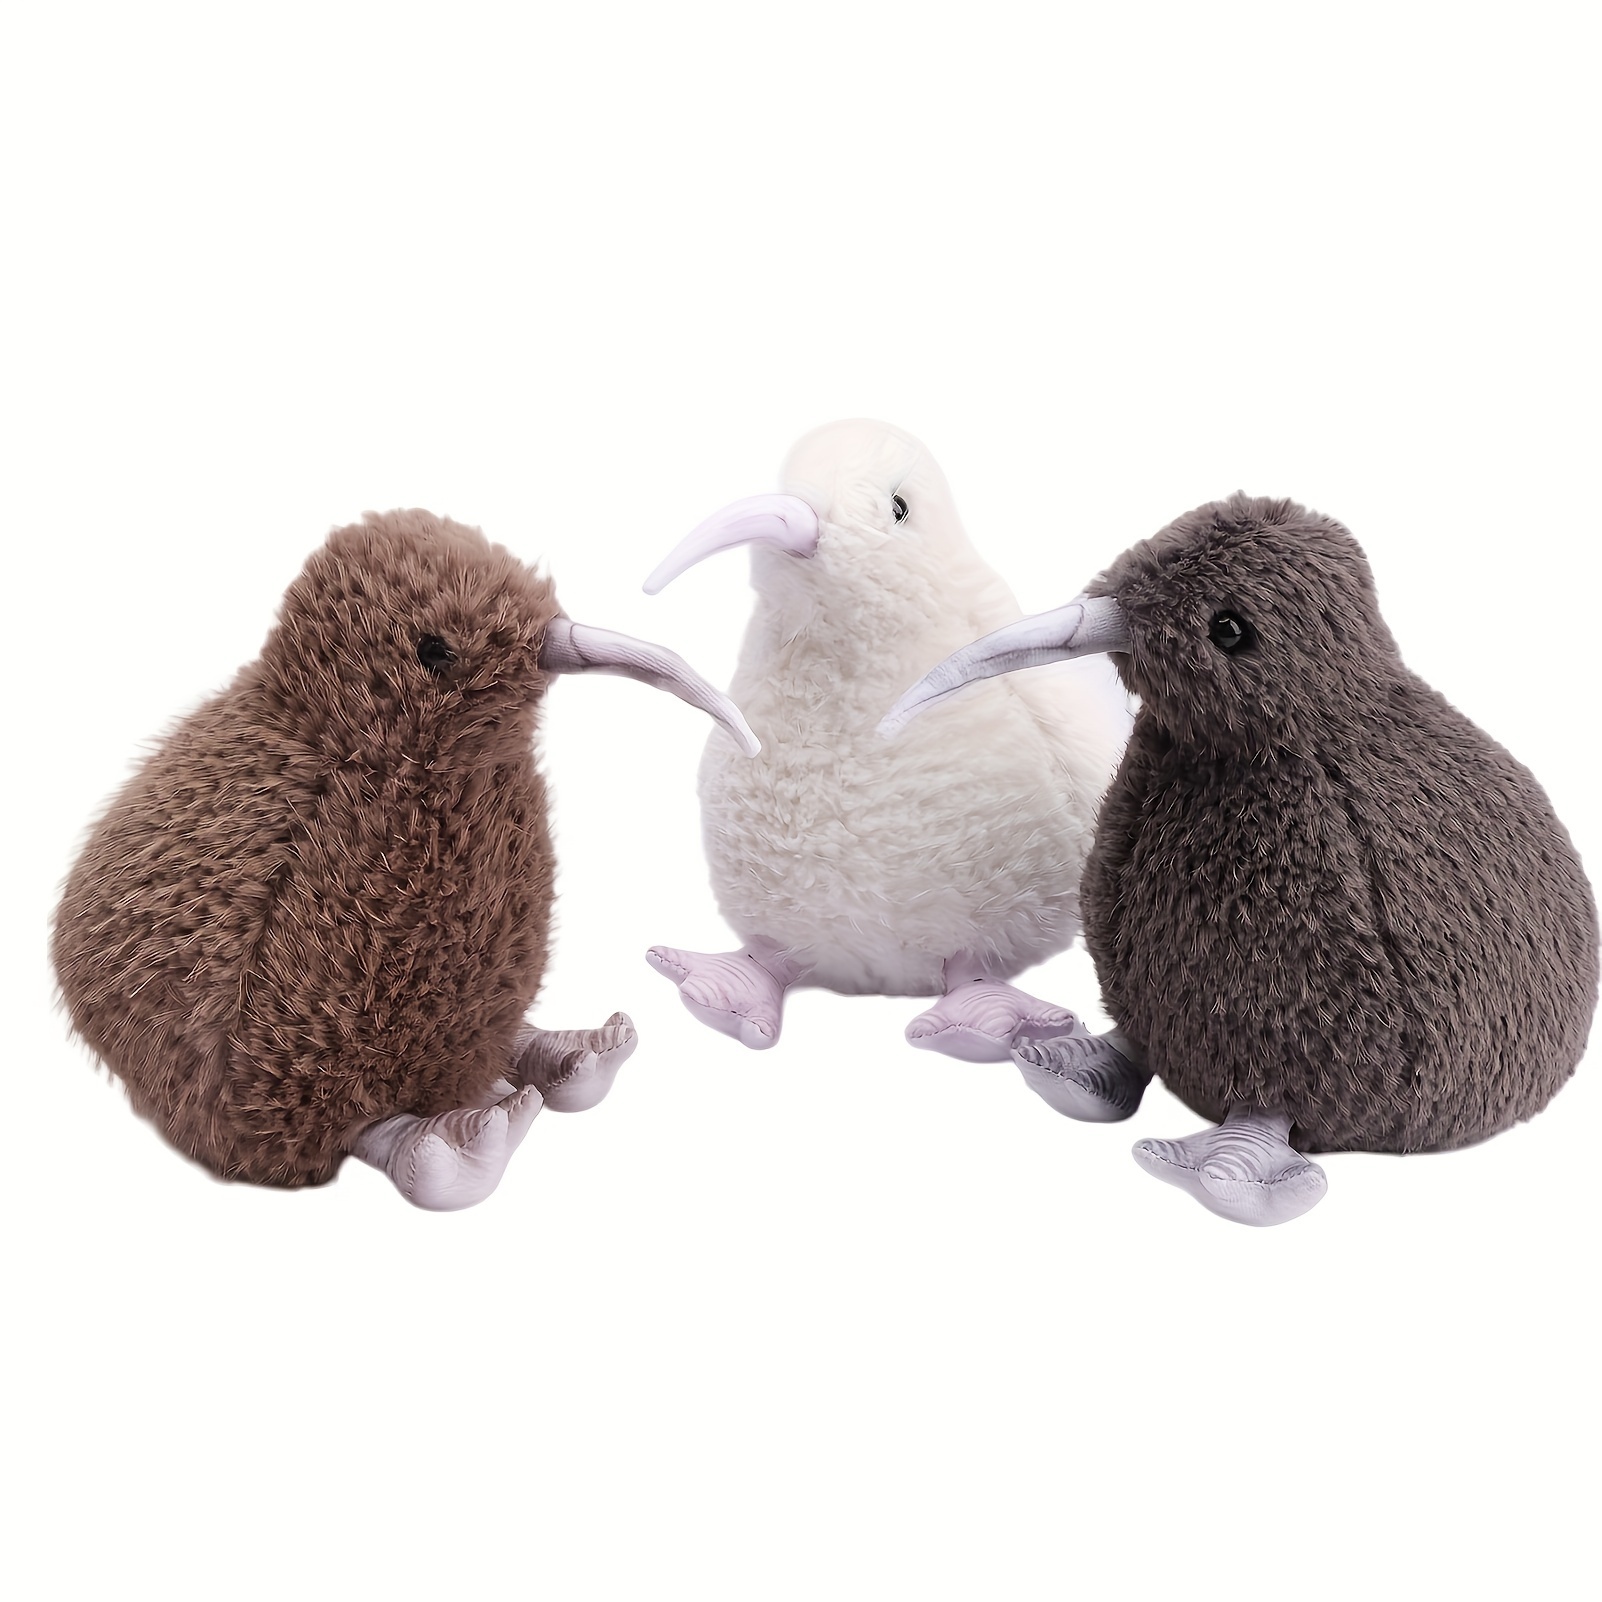 

20cm/7.87in Lifelike Plush Toy - Soft, Realistic Furry Bird Doll - Ideal Present For Boys, Girls, Teens, And Adults